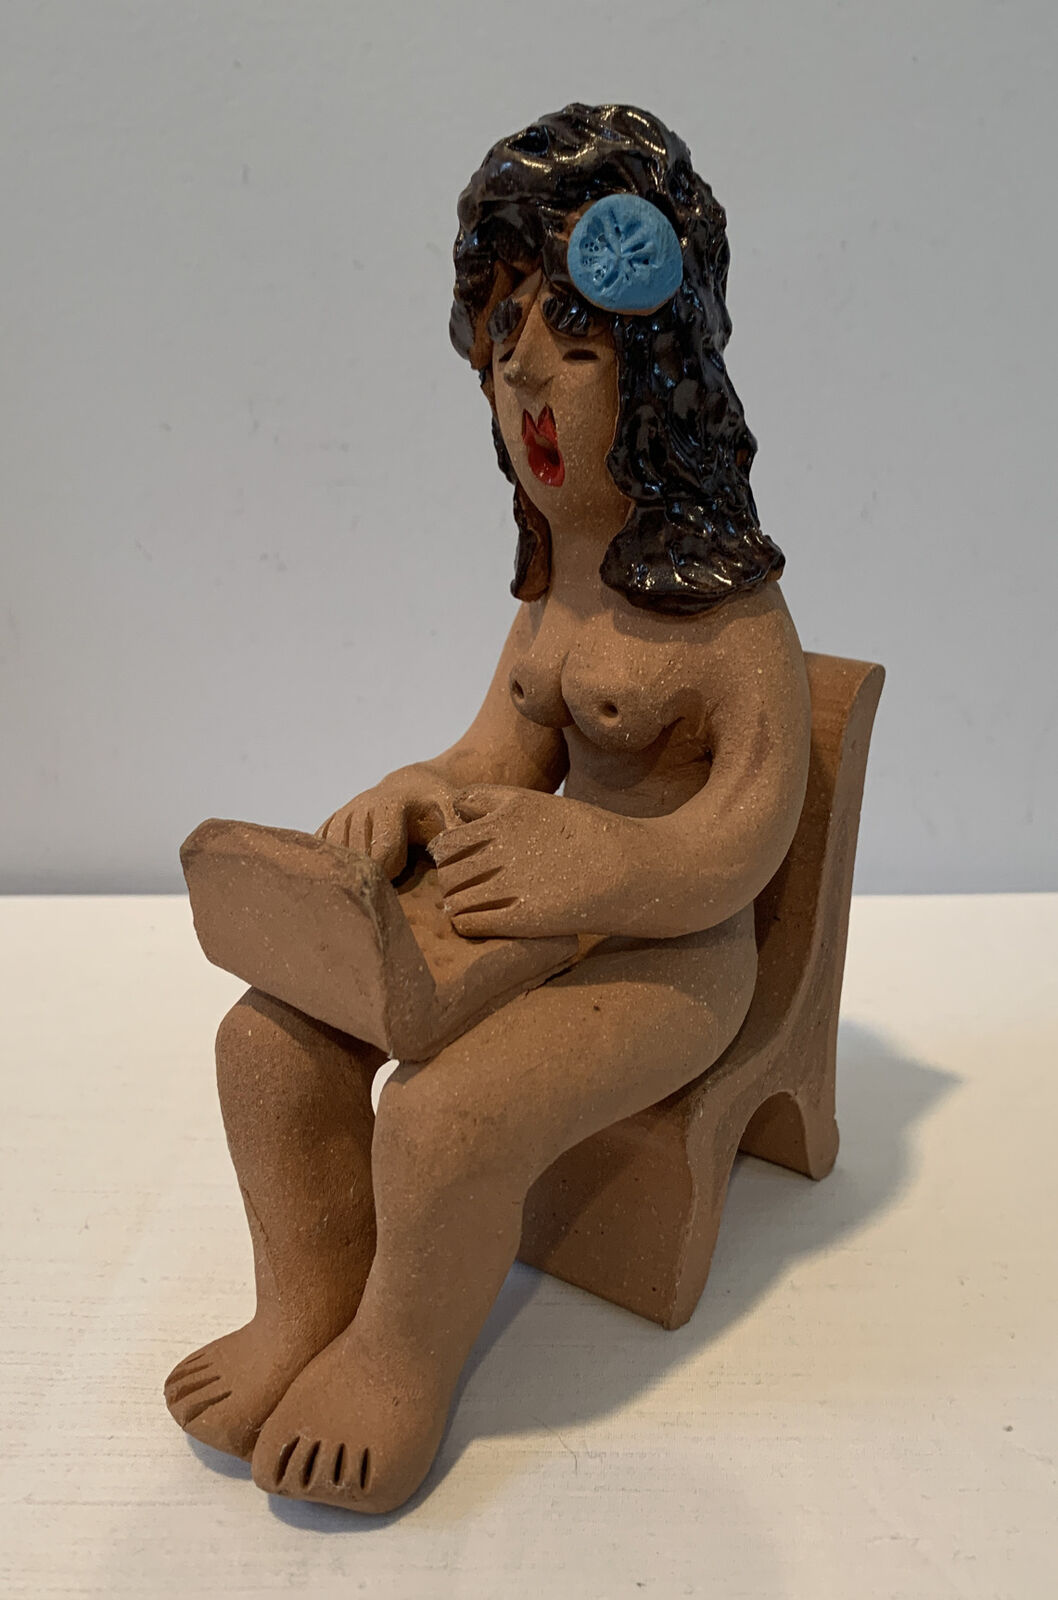 Louis Rizzo Hollis Maine Handmade Clay Sculpture Naked Woman w Computer On Chair